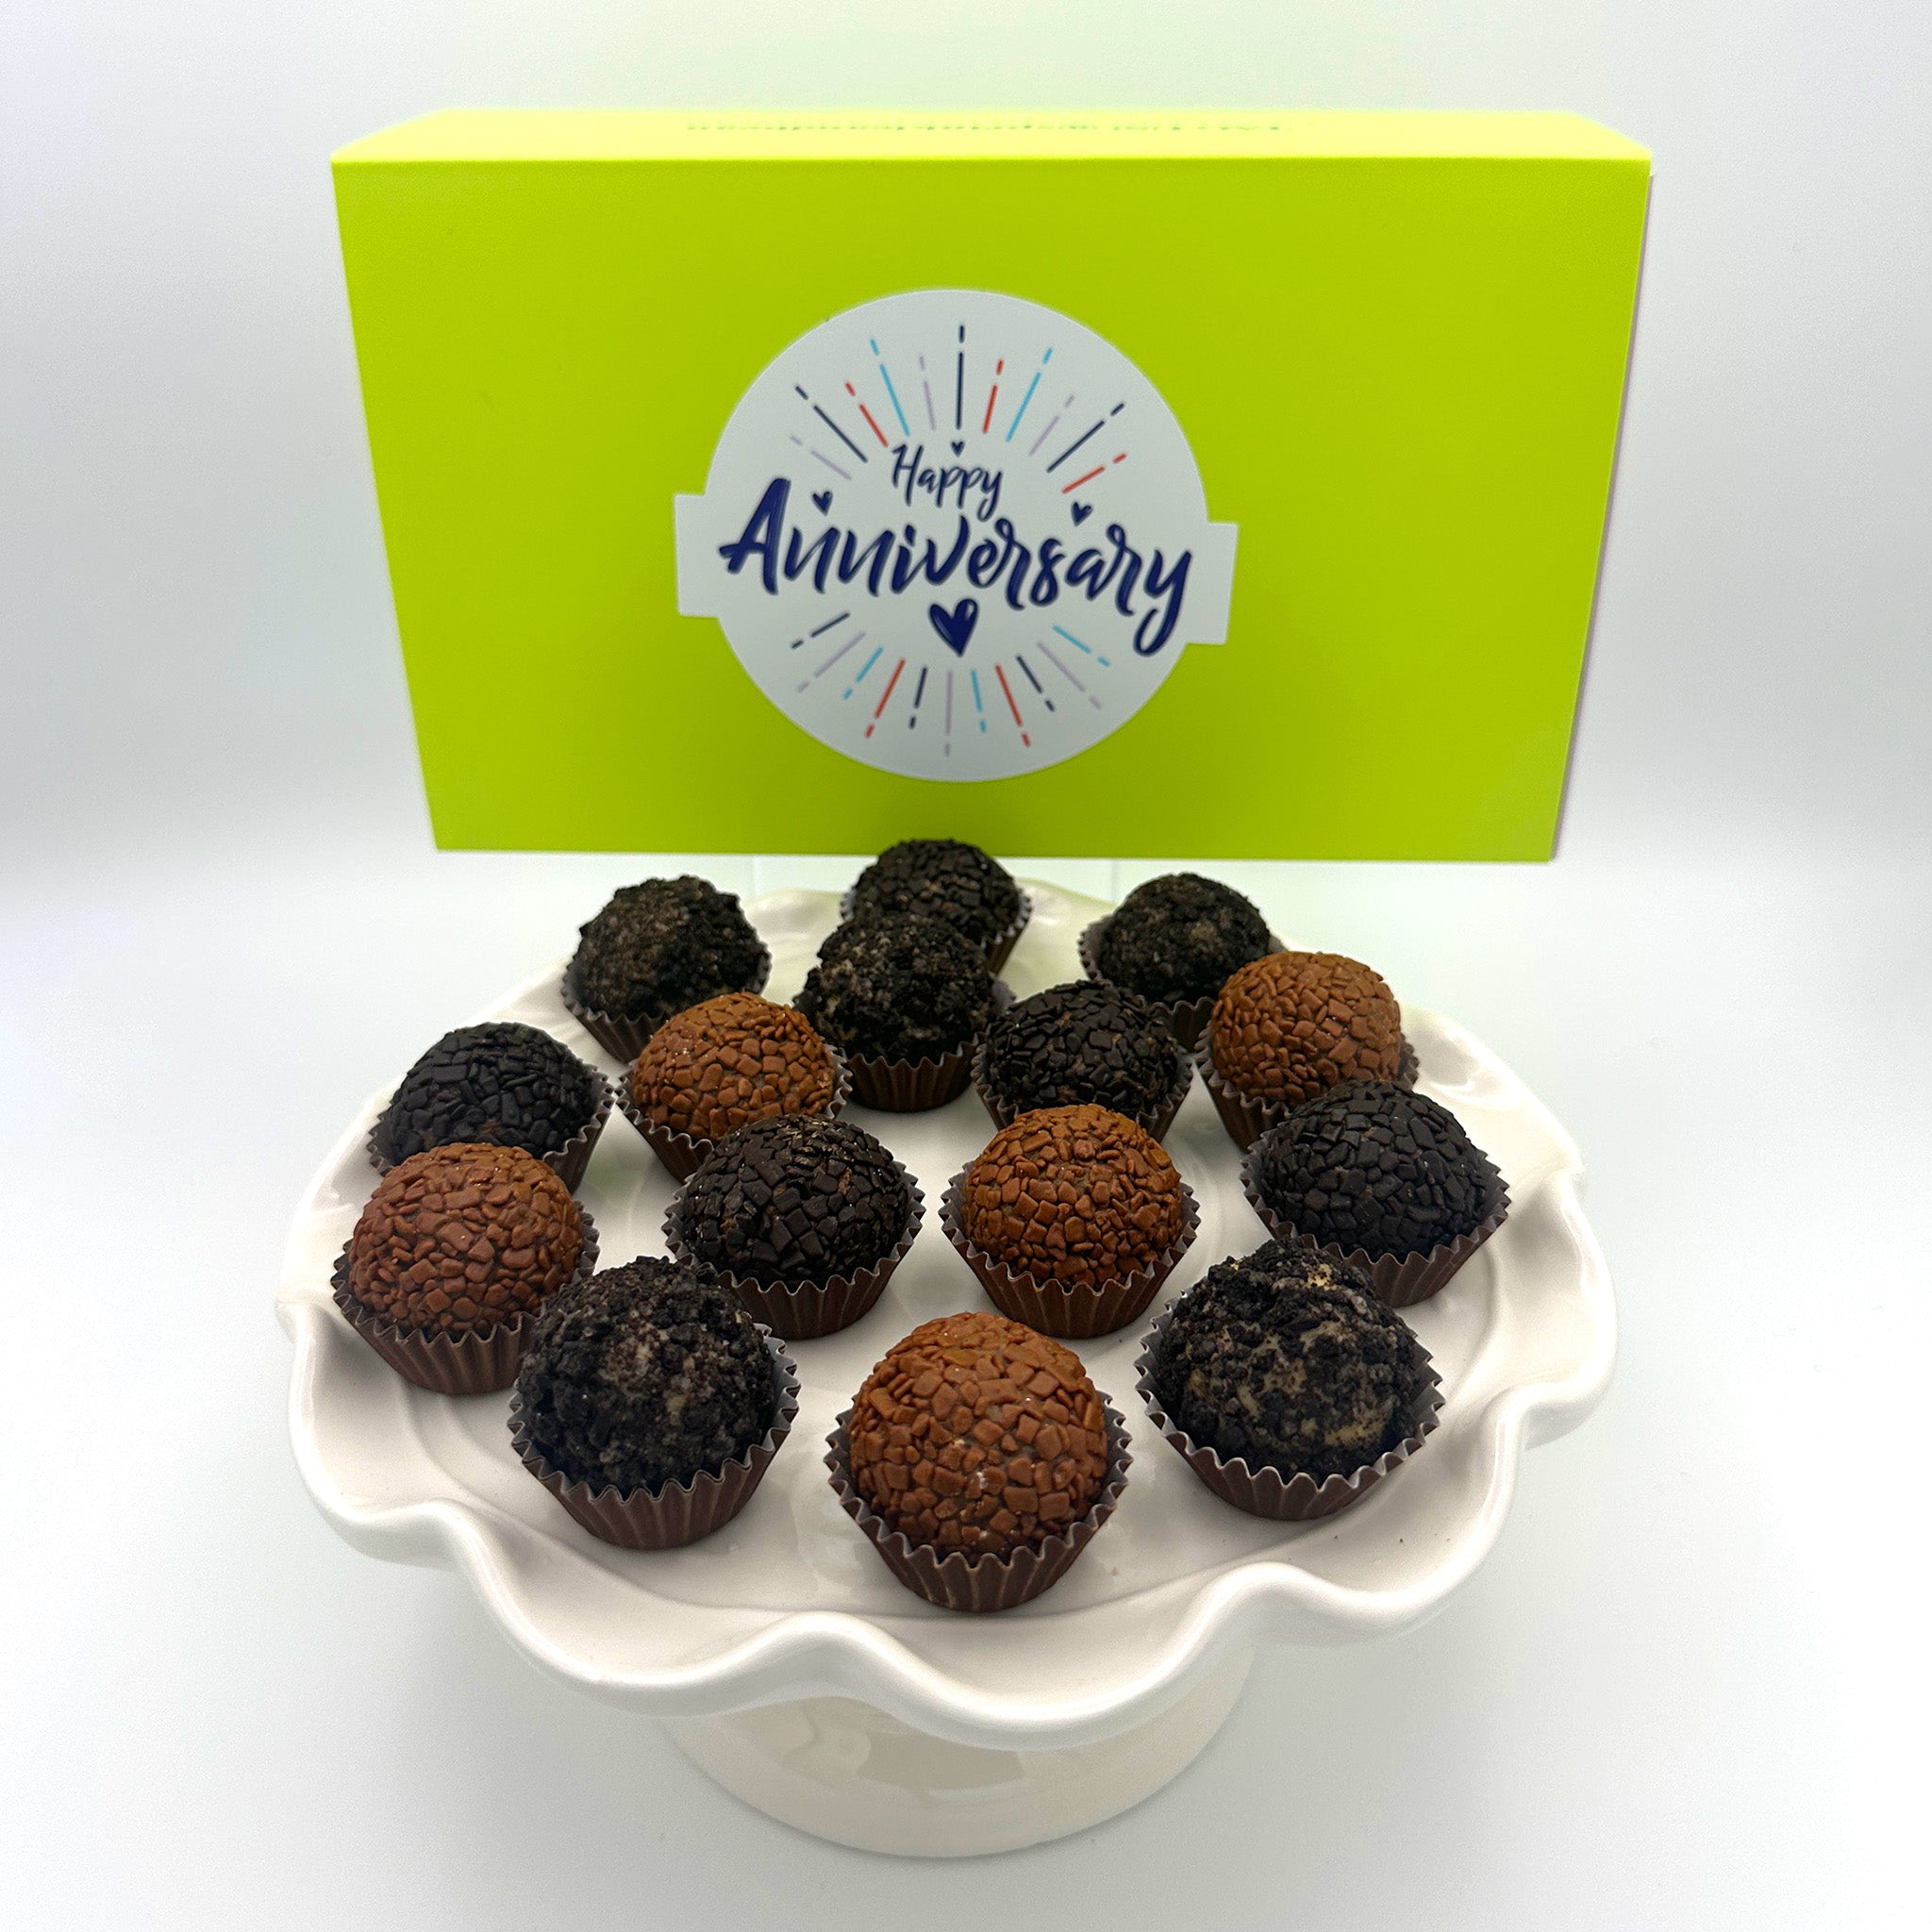 Anniversary Chocolate Lovers Brigadeiros, beloved by chocolate lovers worldwide, are delicately placed on a white plate alongside a charming yellow box, making them a perfect treat for any anniversary celebration.